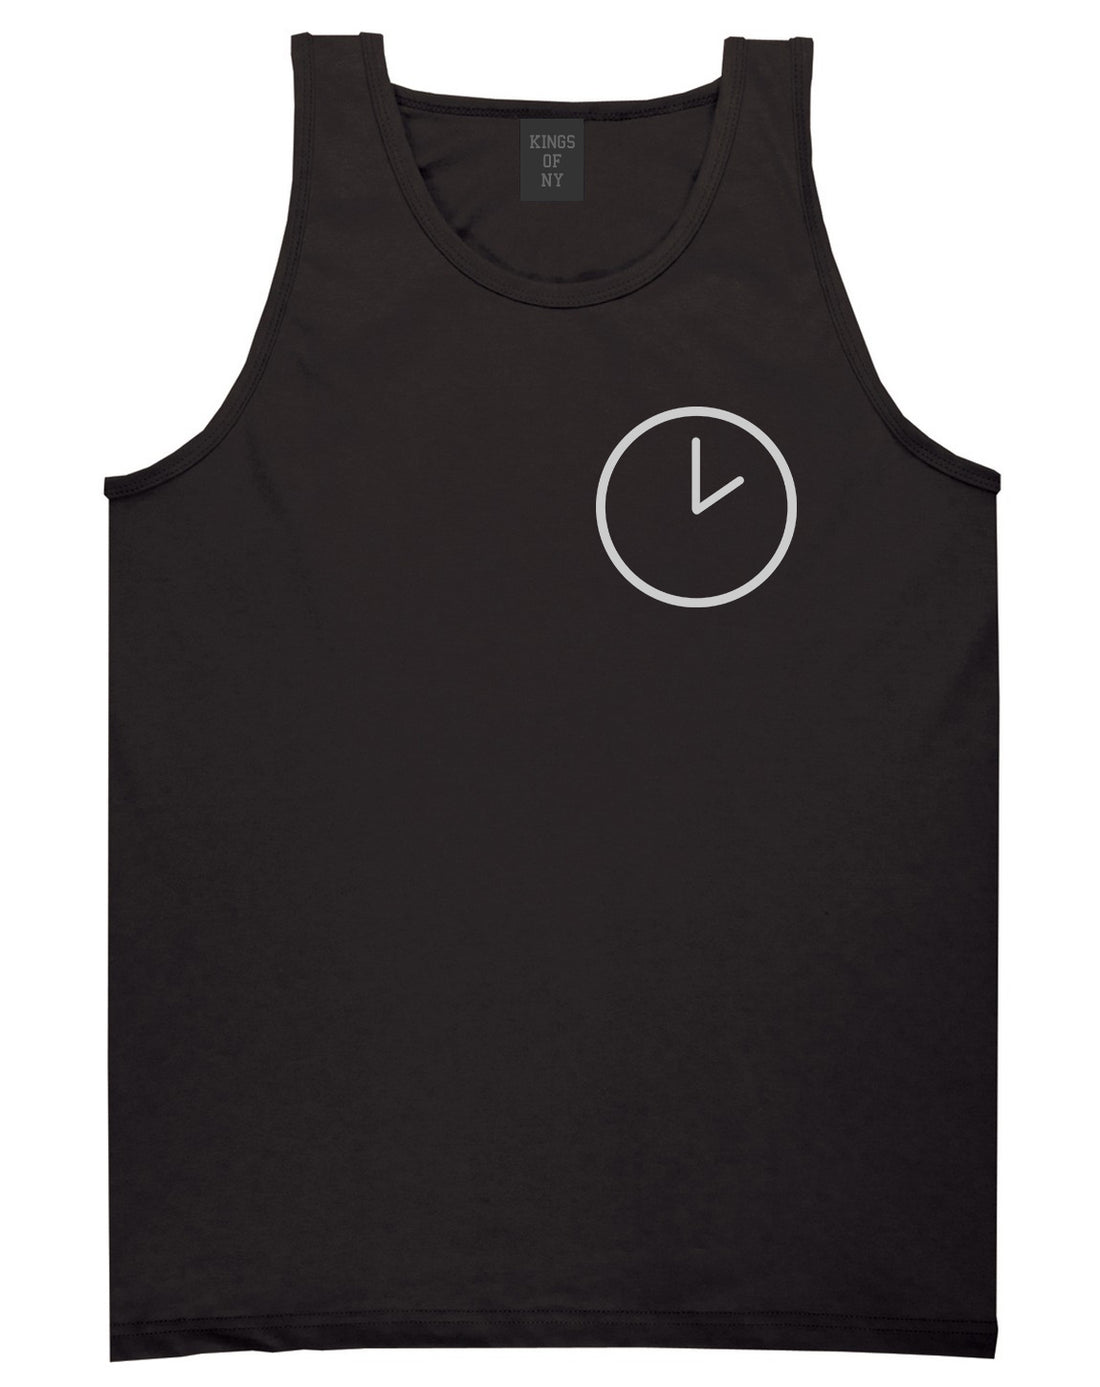 Clock Chest Black Tank Top Shirt by Kings Of NY